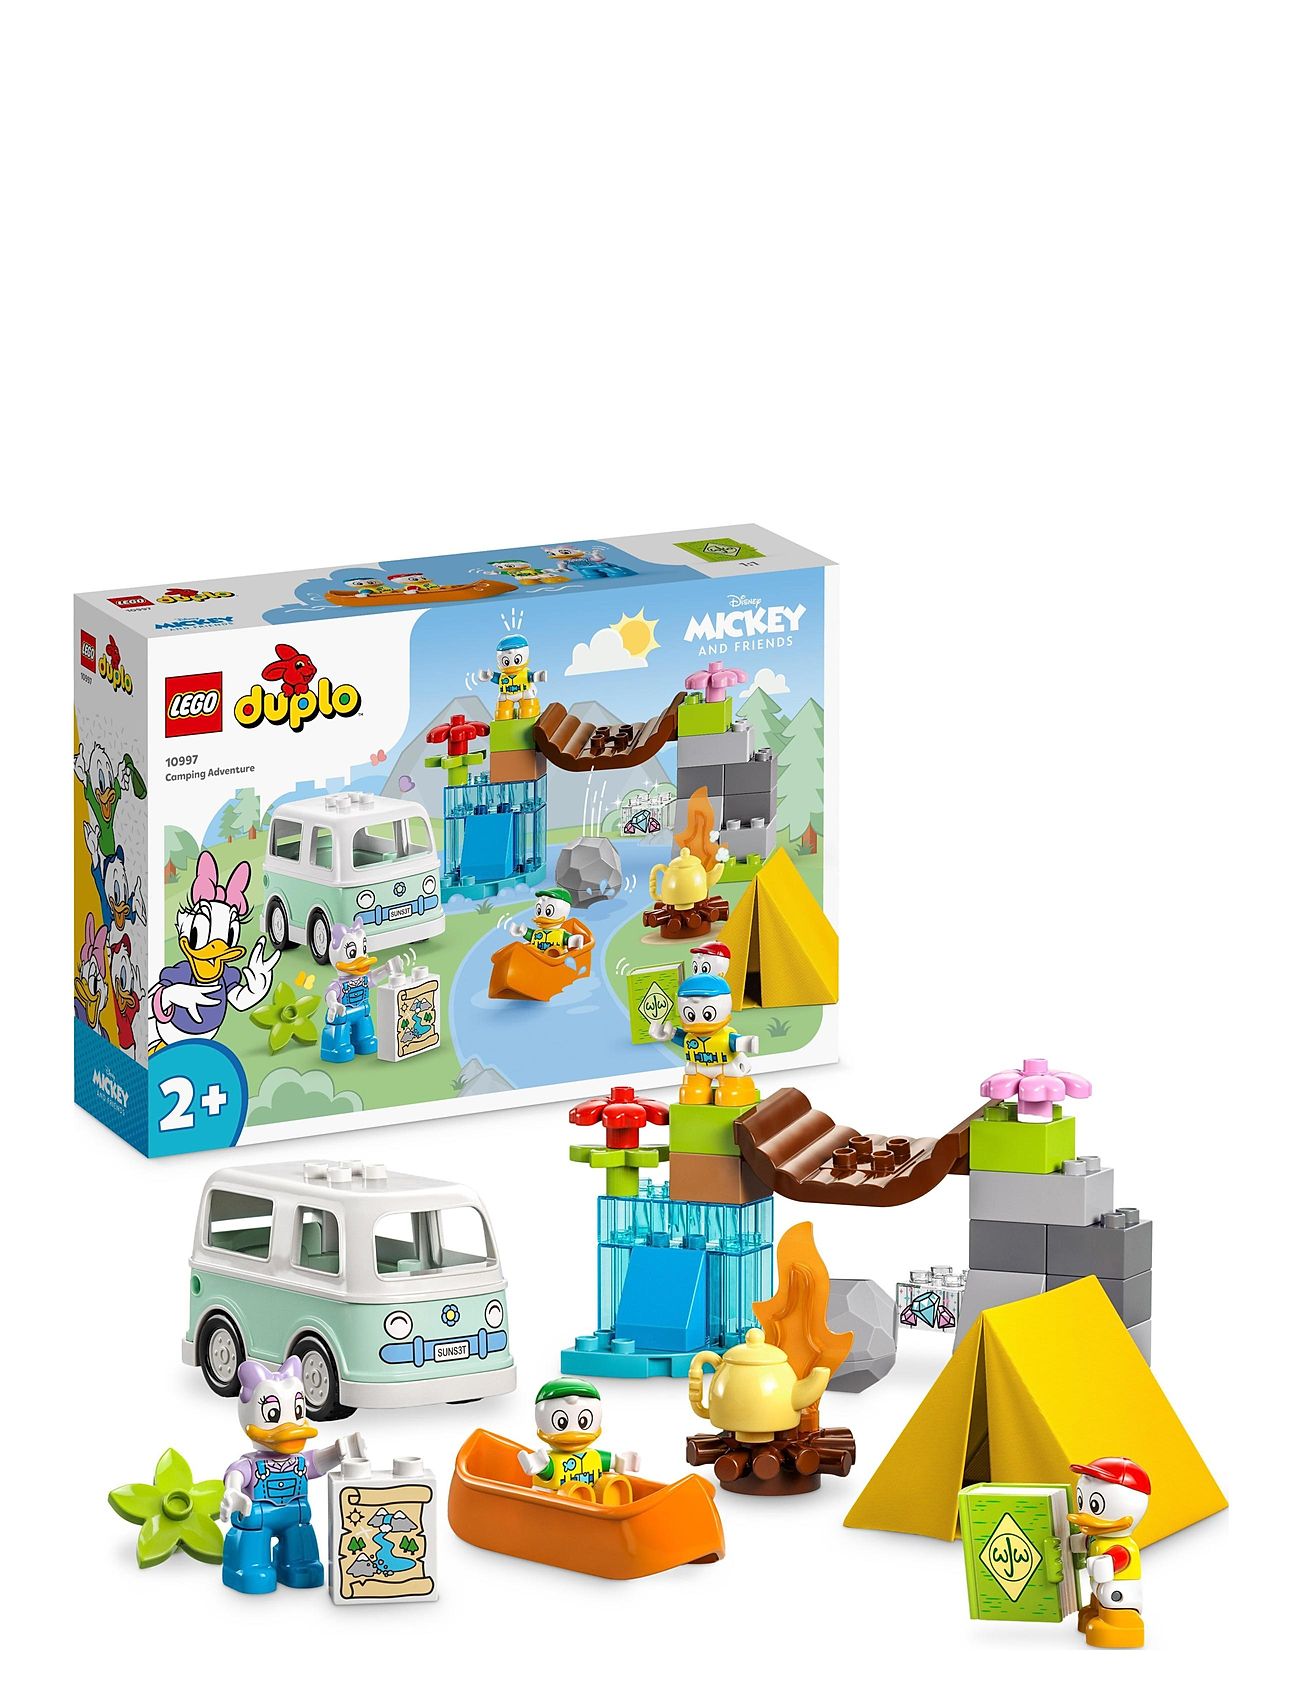 Disney Mickey And Friends Camping Adventure Toys Lego Toys Lego duplo Multi/patterned LEGO